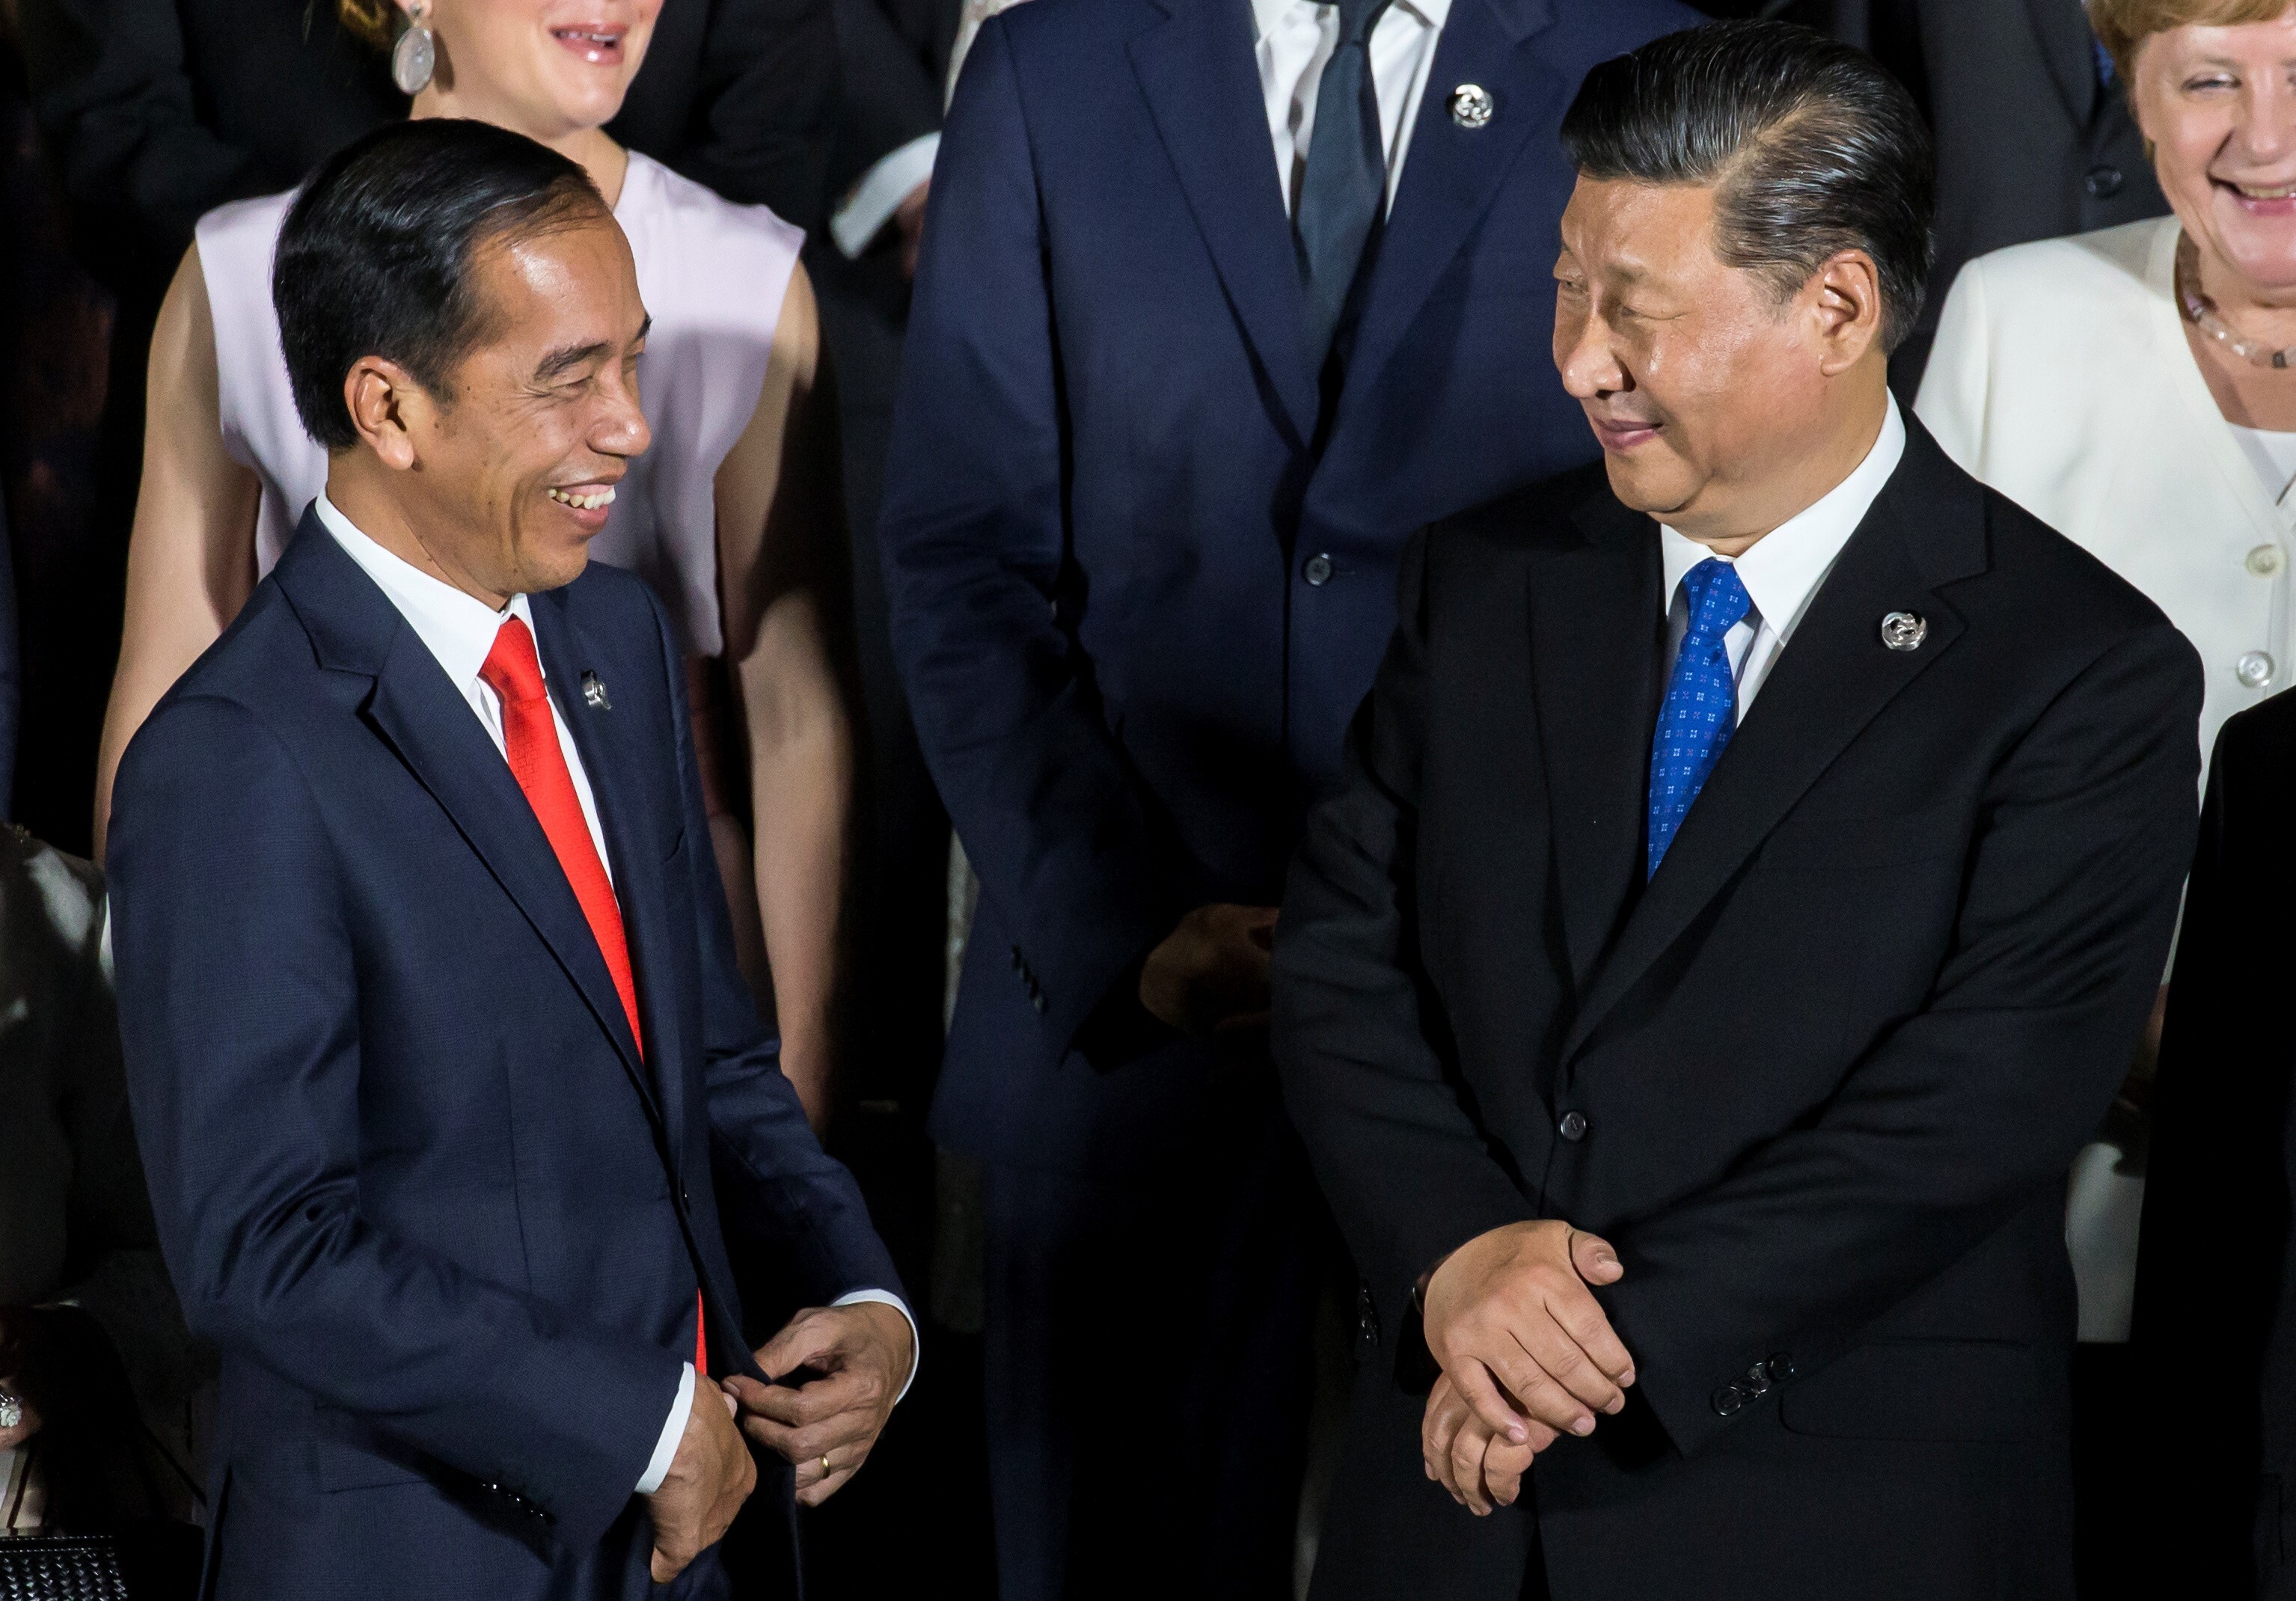 Indonesia's President Joko Widodo speaks to China's President Xi Jinping during a photo session at the G20 summit in Osaka last June. Photo: Reuters